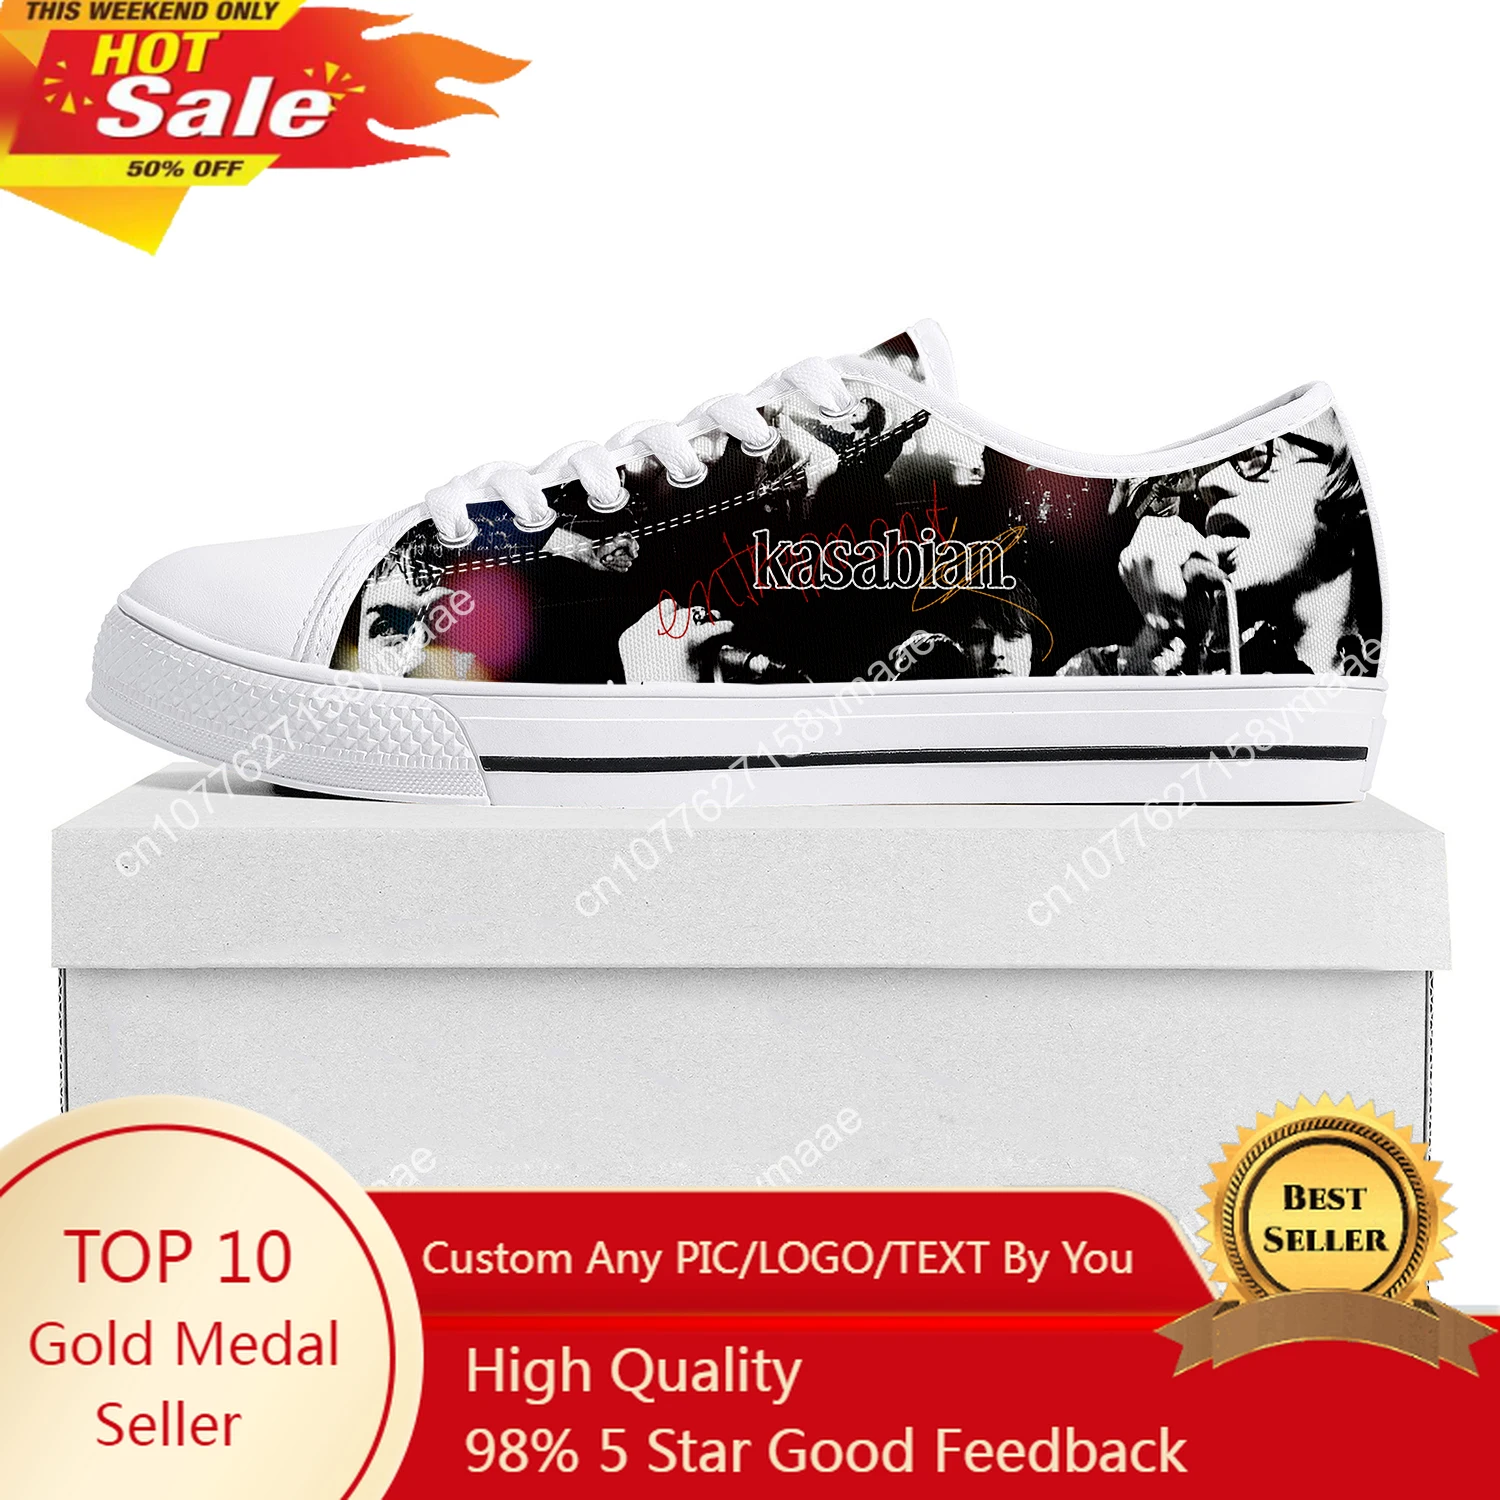 

Kasabian Rock Band Low Top Sneakers Mens Womens Teenager Canvas High Quality Sneaker Casual Custom Made Shoes Customize DIY Shoe